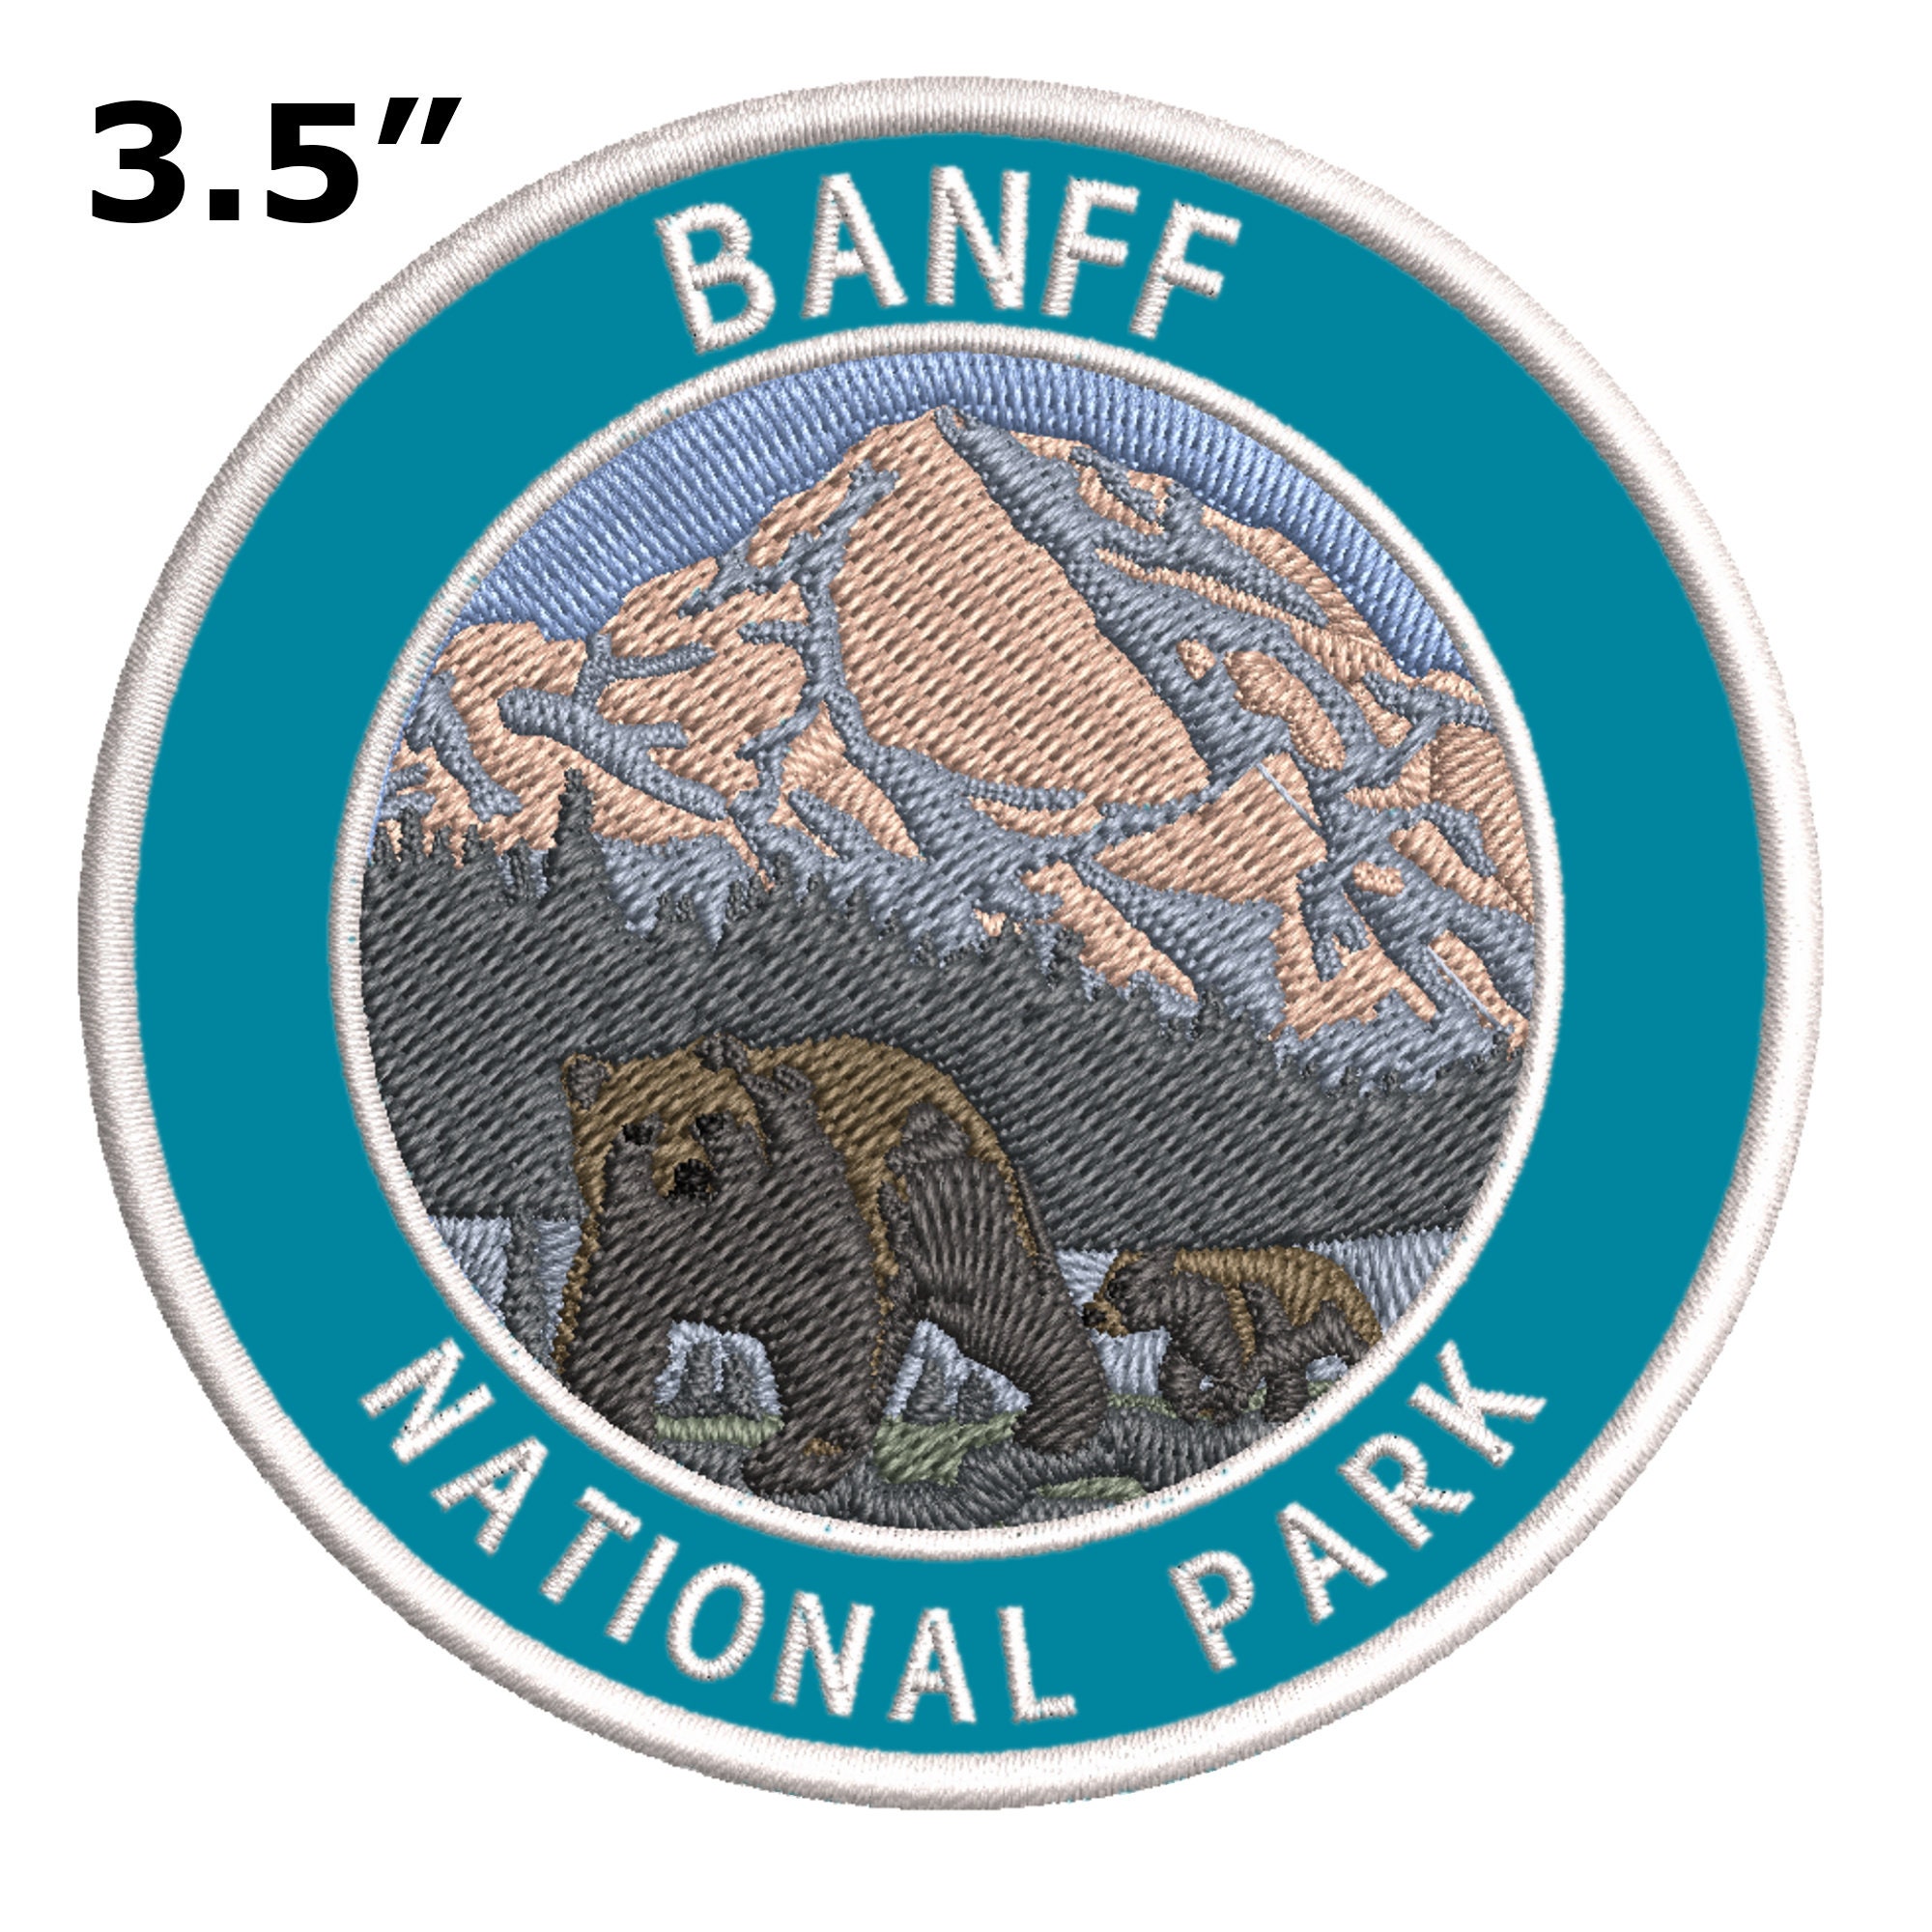 Banff National Park Full embroidered illustrated iron-on patch